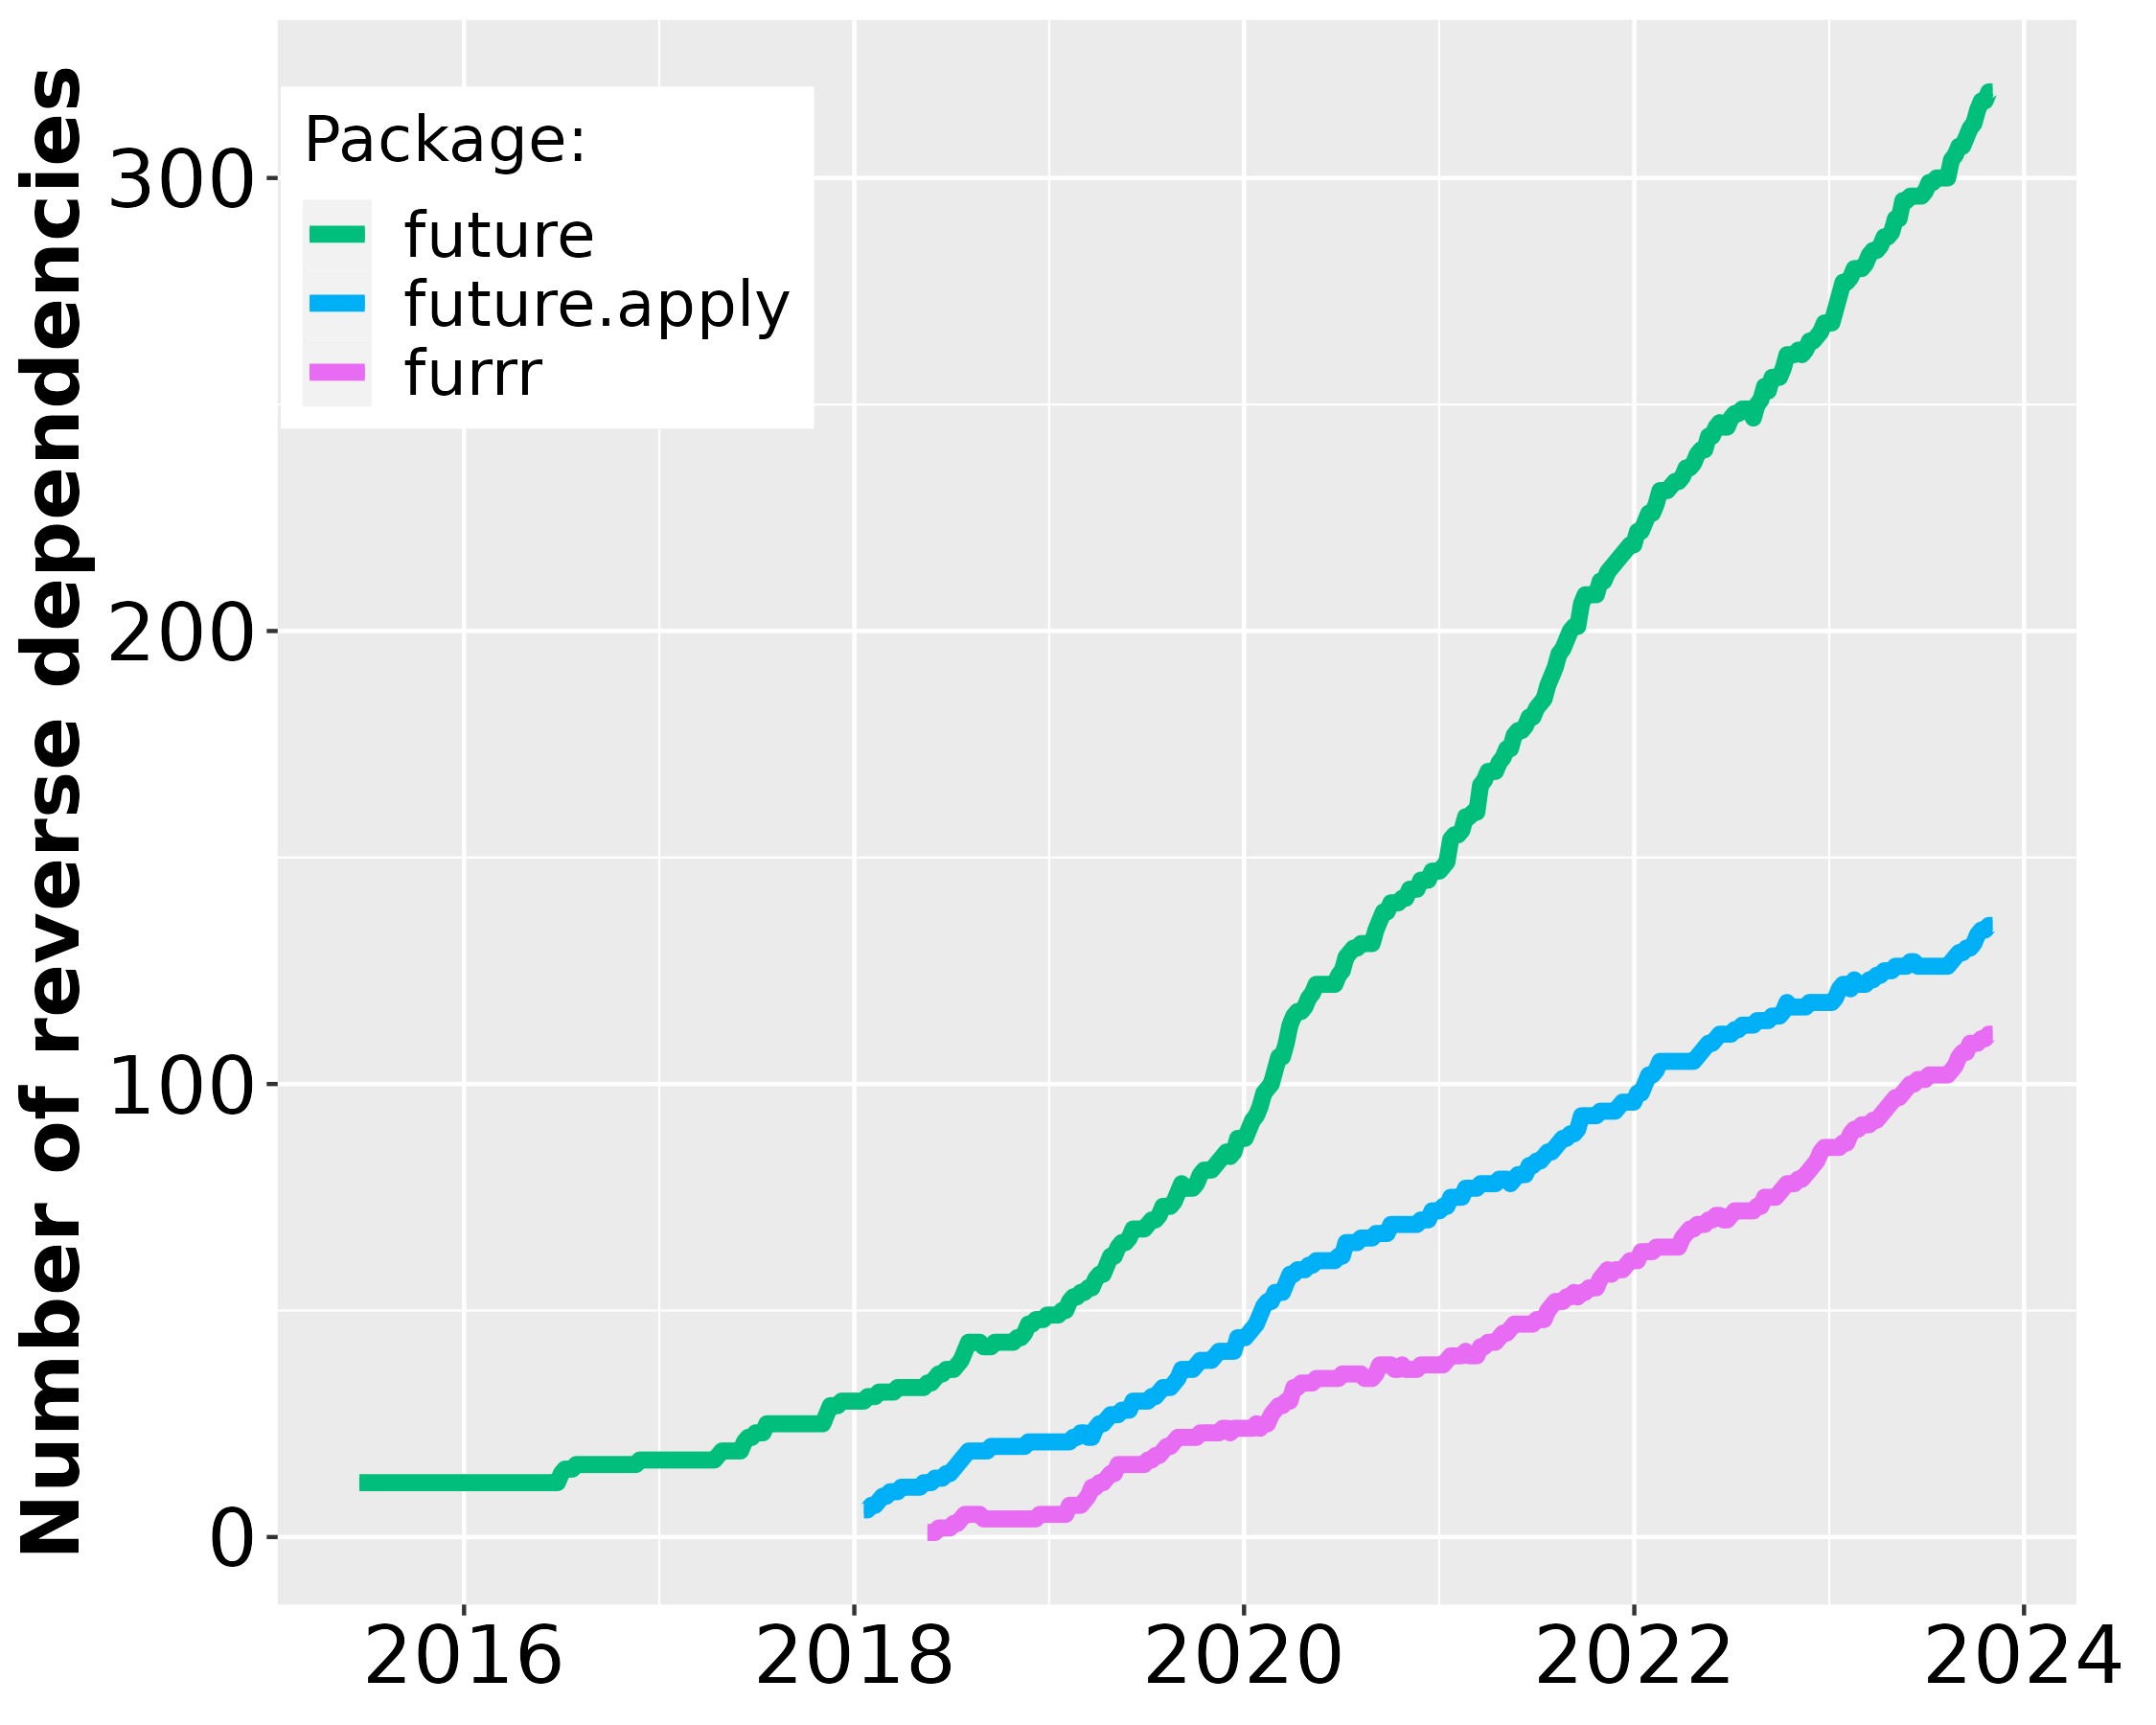 A line graph with 2015-2022 on the horizontal axis and 'Number of reverse dependencies' on the vertical axis. Rapidly growing curves for three packages, 'future', 'future.apply', and 'furrr', are shown with 'future' increasing the fastest.